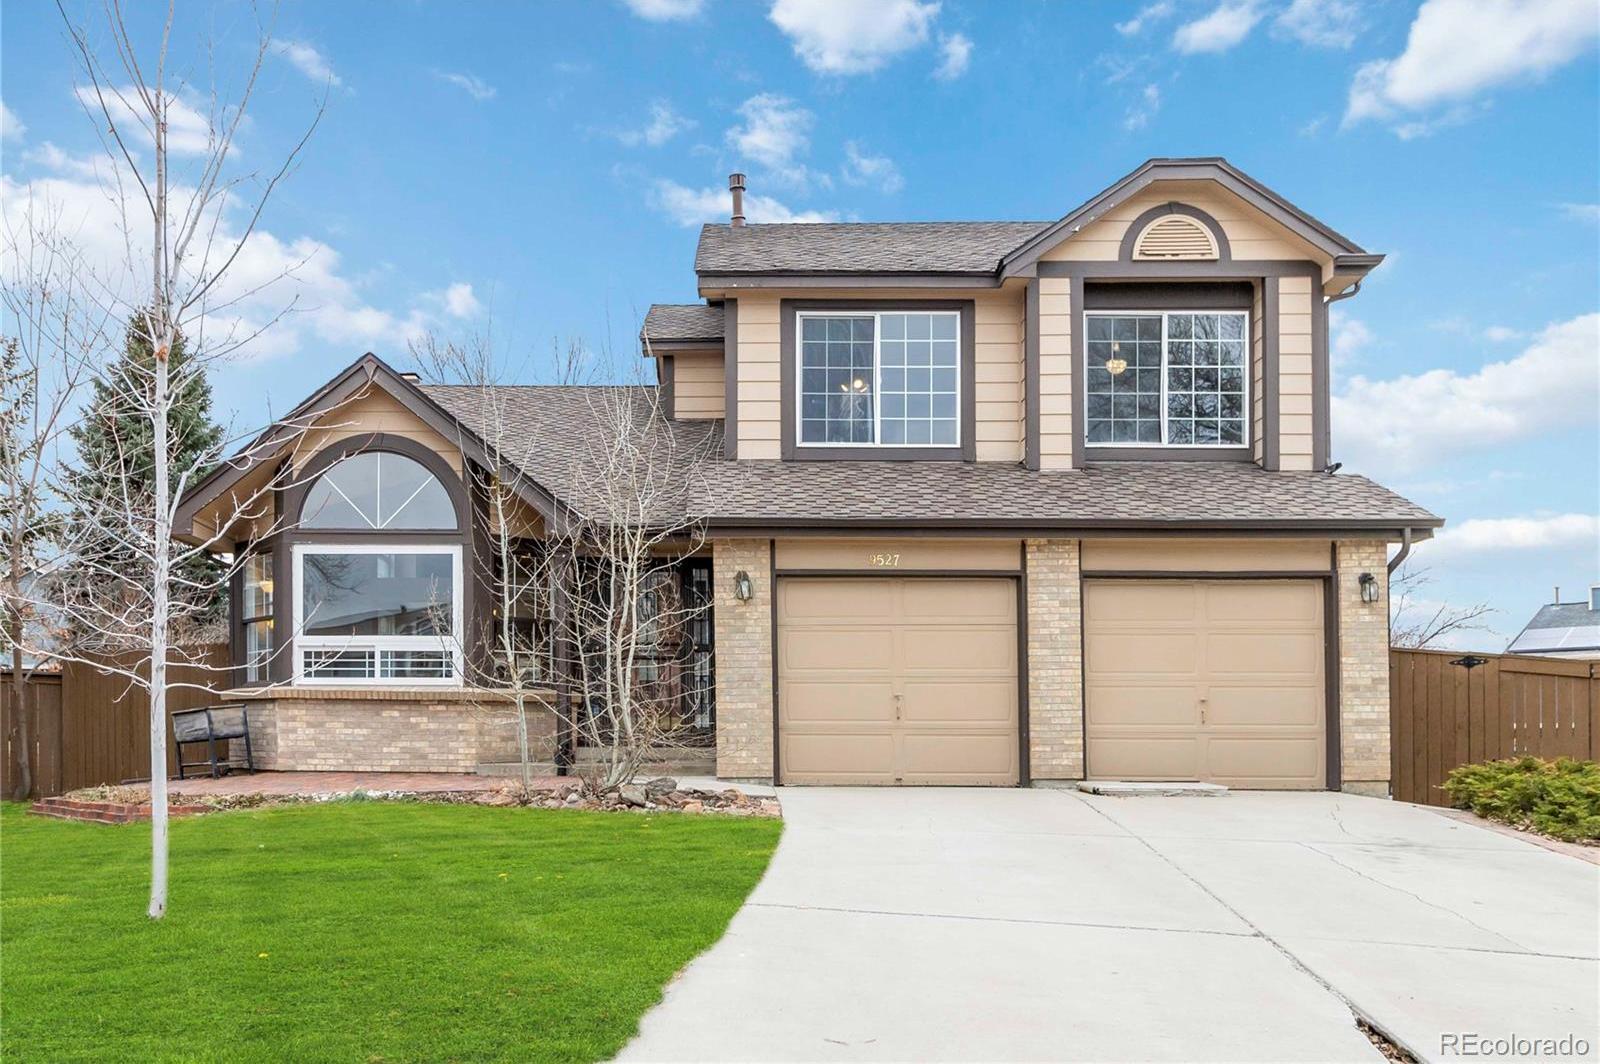 Photo one of 9527 Sherrelwood Ln Highlands Ranch CO 80126 | MLS 6069117